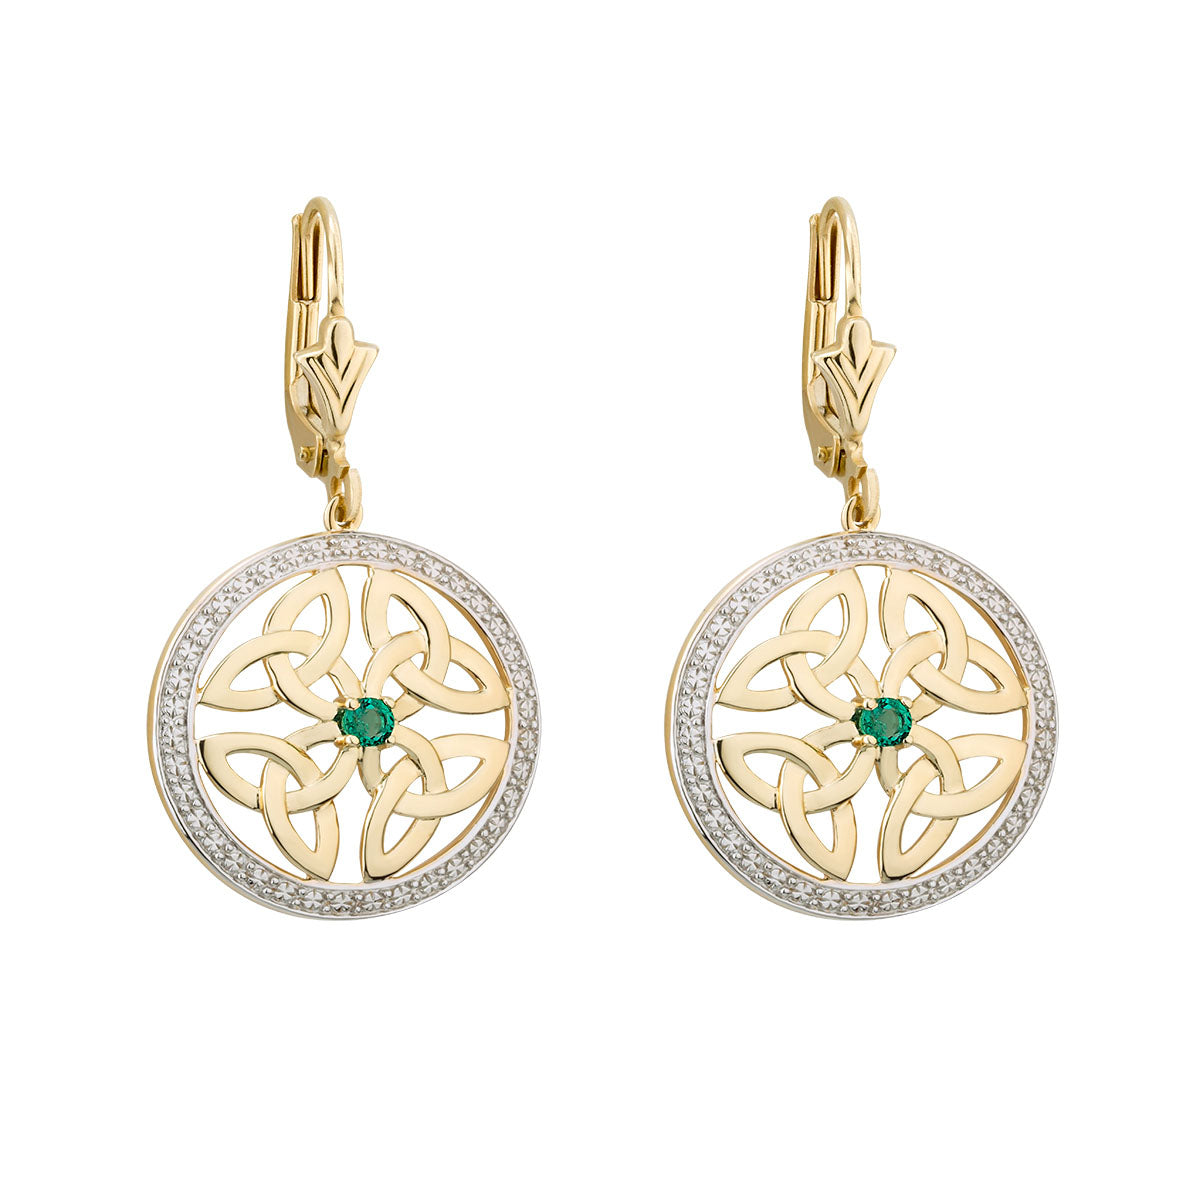 10k gold emerald trinity knot circle earrings s33985 from Solvar